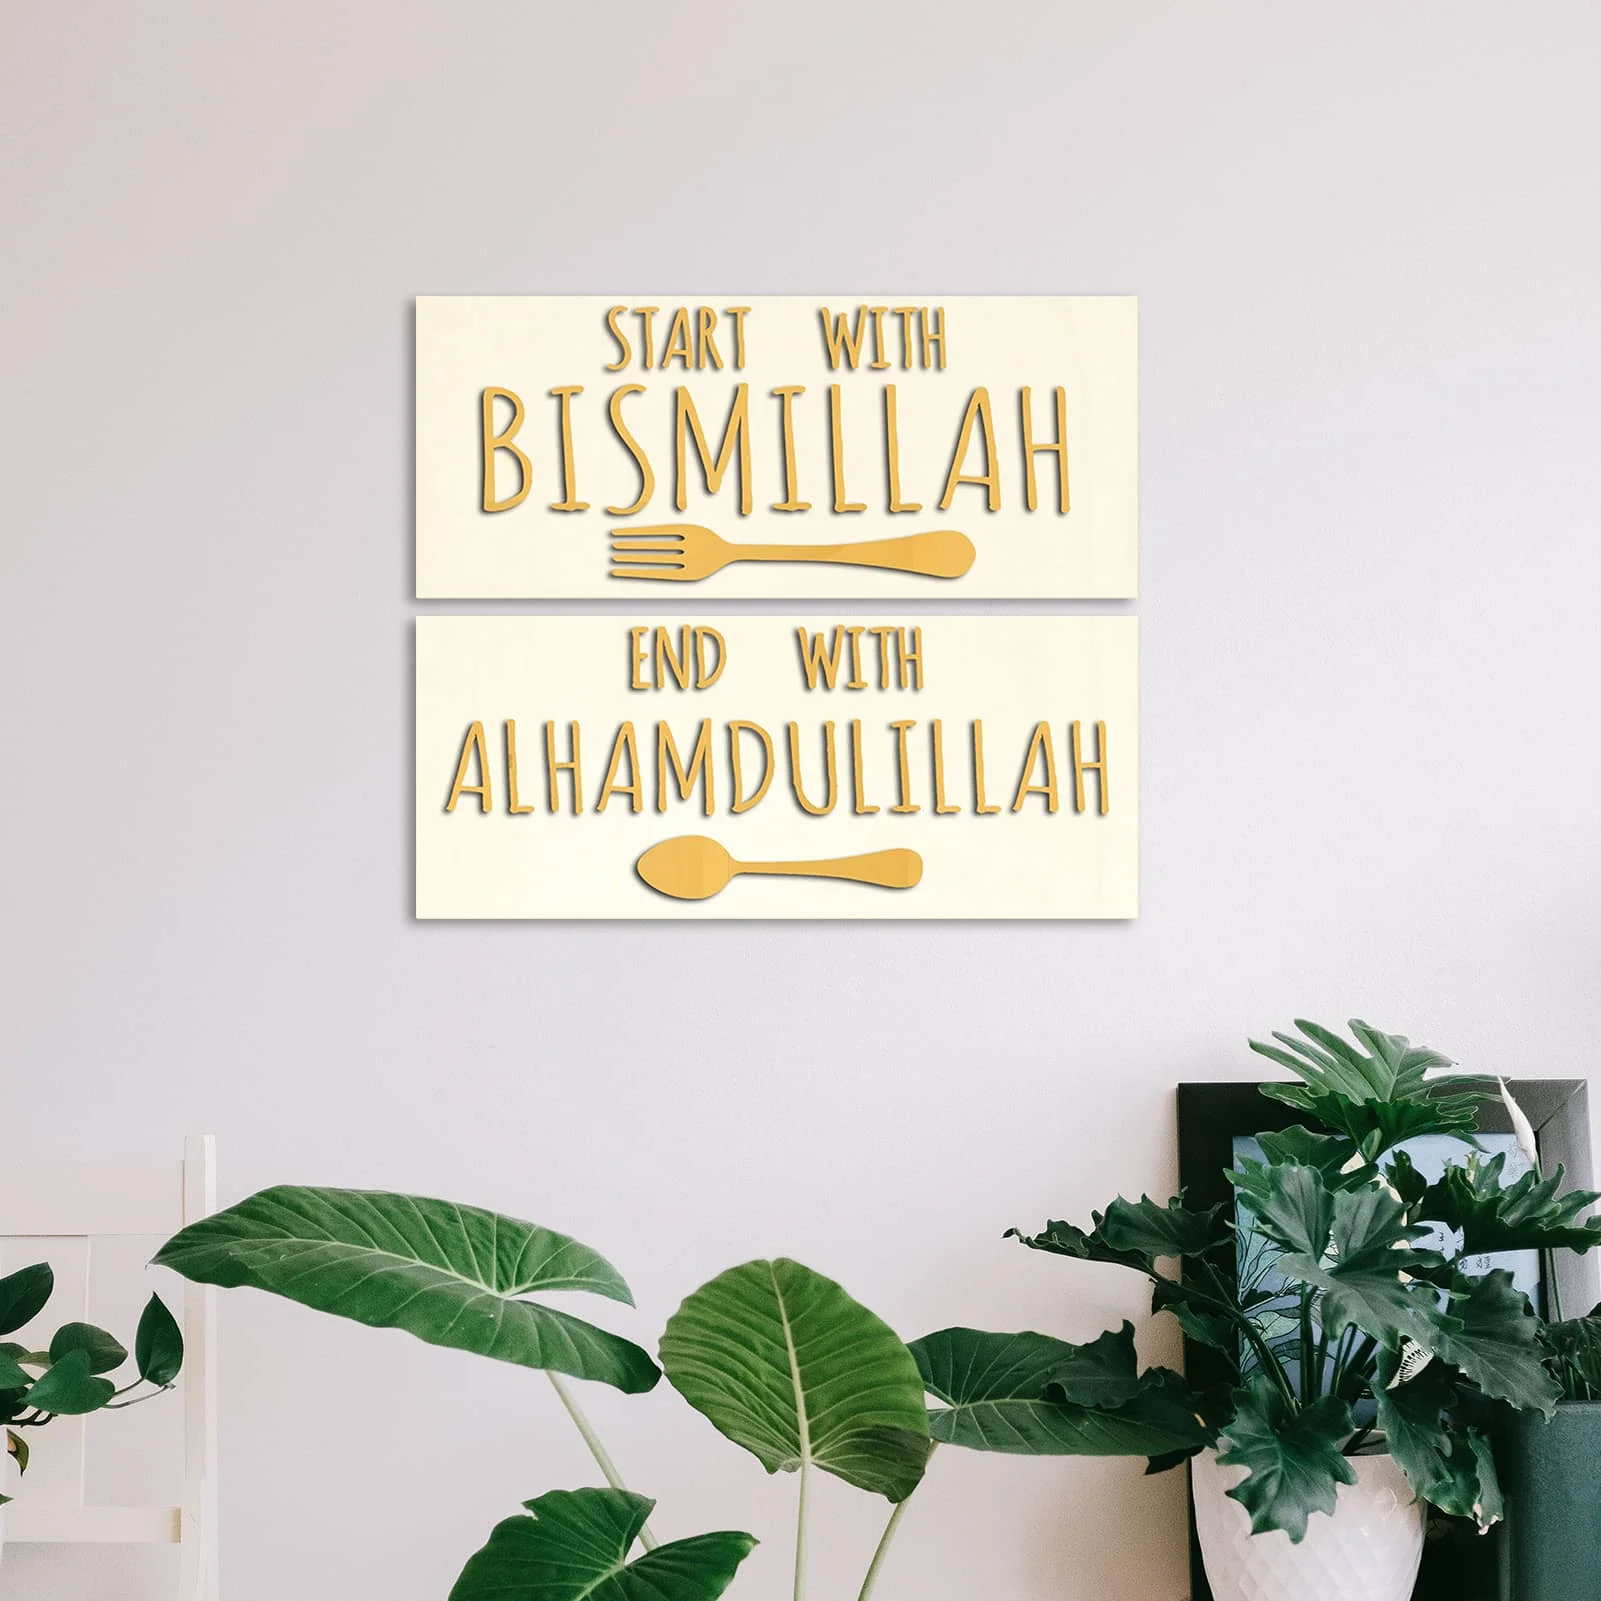 

Wall Sticker Decor Islamic Wall Decals With Start With Bismillah End With Alhamdulillah QuotesIslamic Wall Art Stickers For Wall